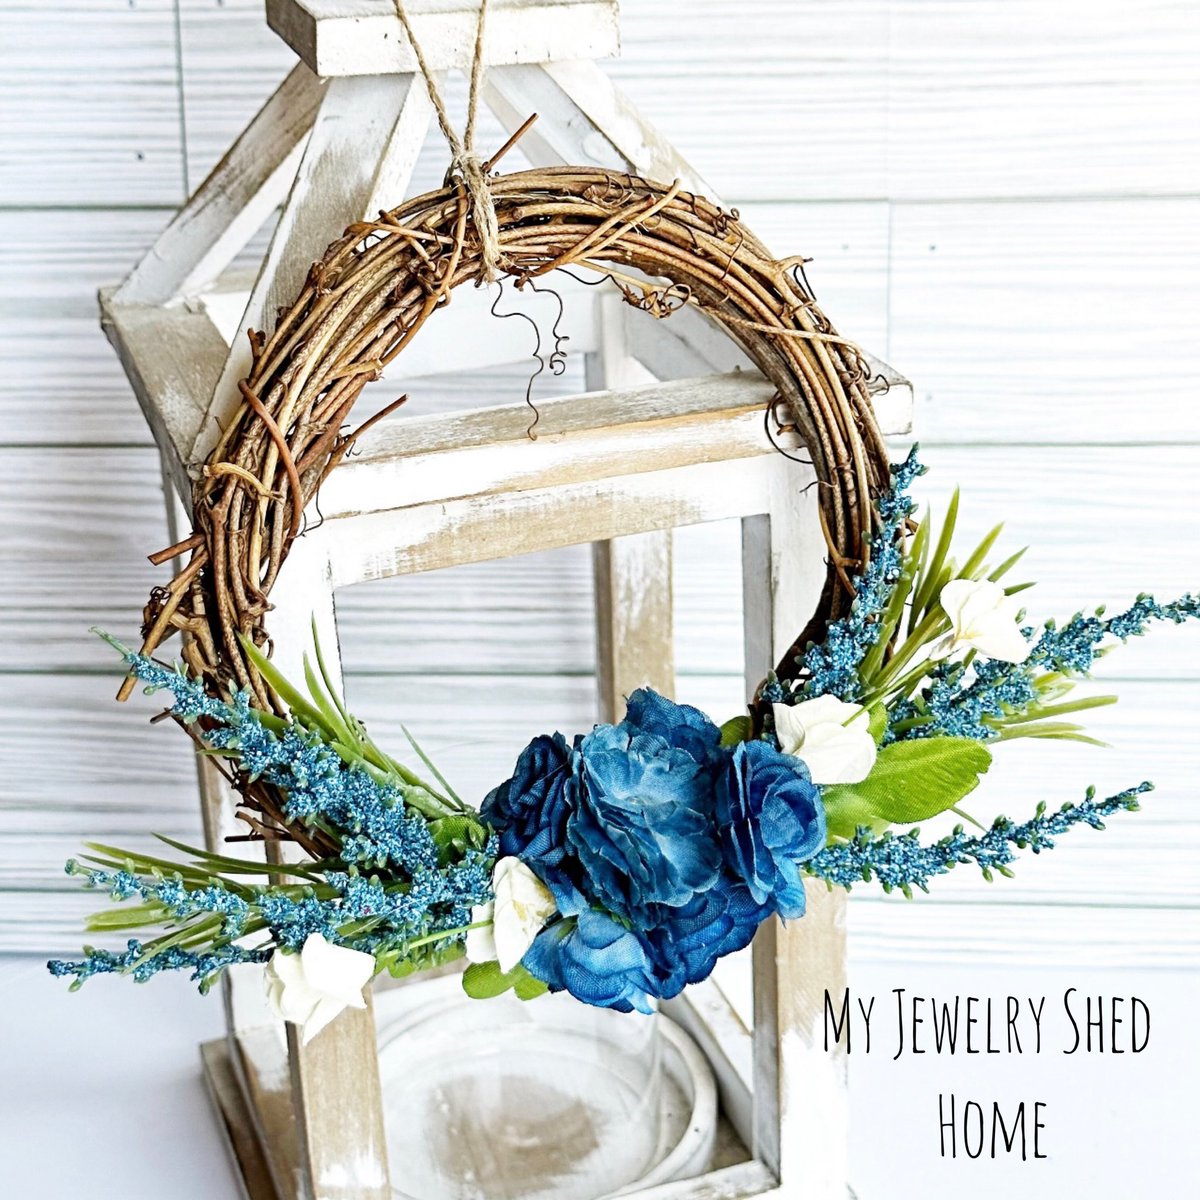 Newest Mini Grapevine Wreath! 6” in diameter for the small spaces! Beautiful over a Vase! Only one available and it’s on sale through July 6th at 15%off!  

etsy.com/listing/147299…
#wreath #myjewelryshed #homedecor #farmhousewreath #etsy #miniwreath